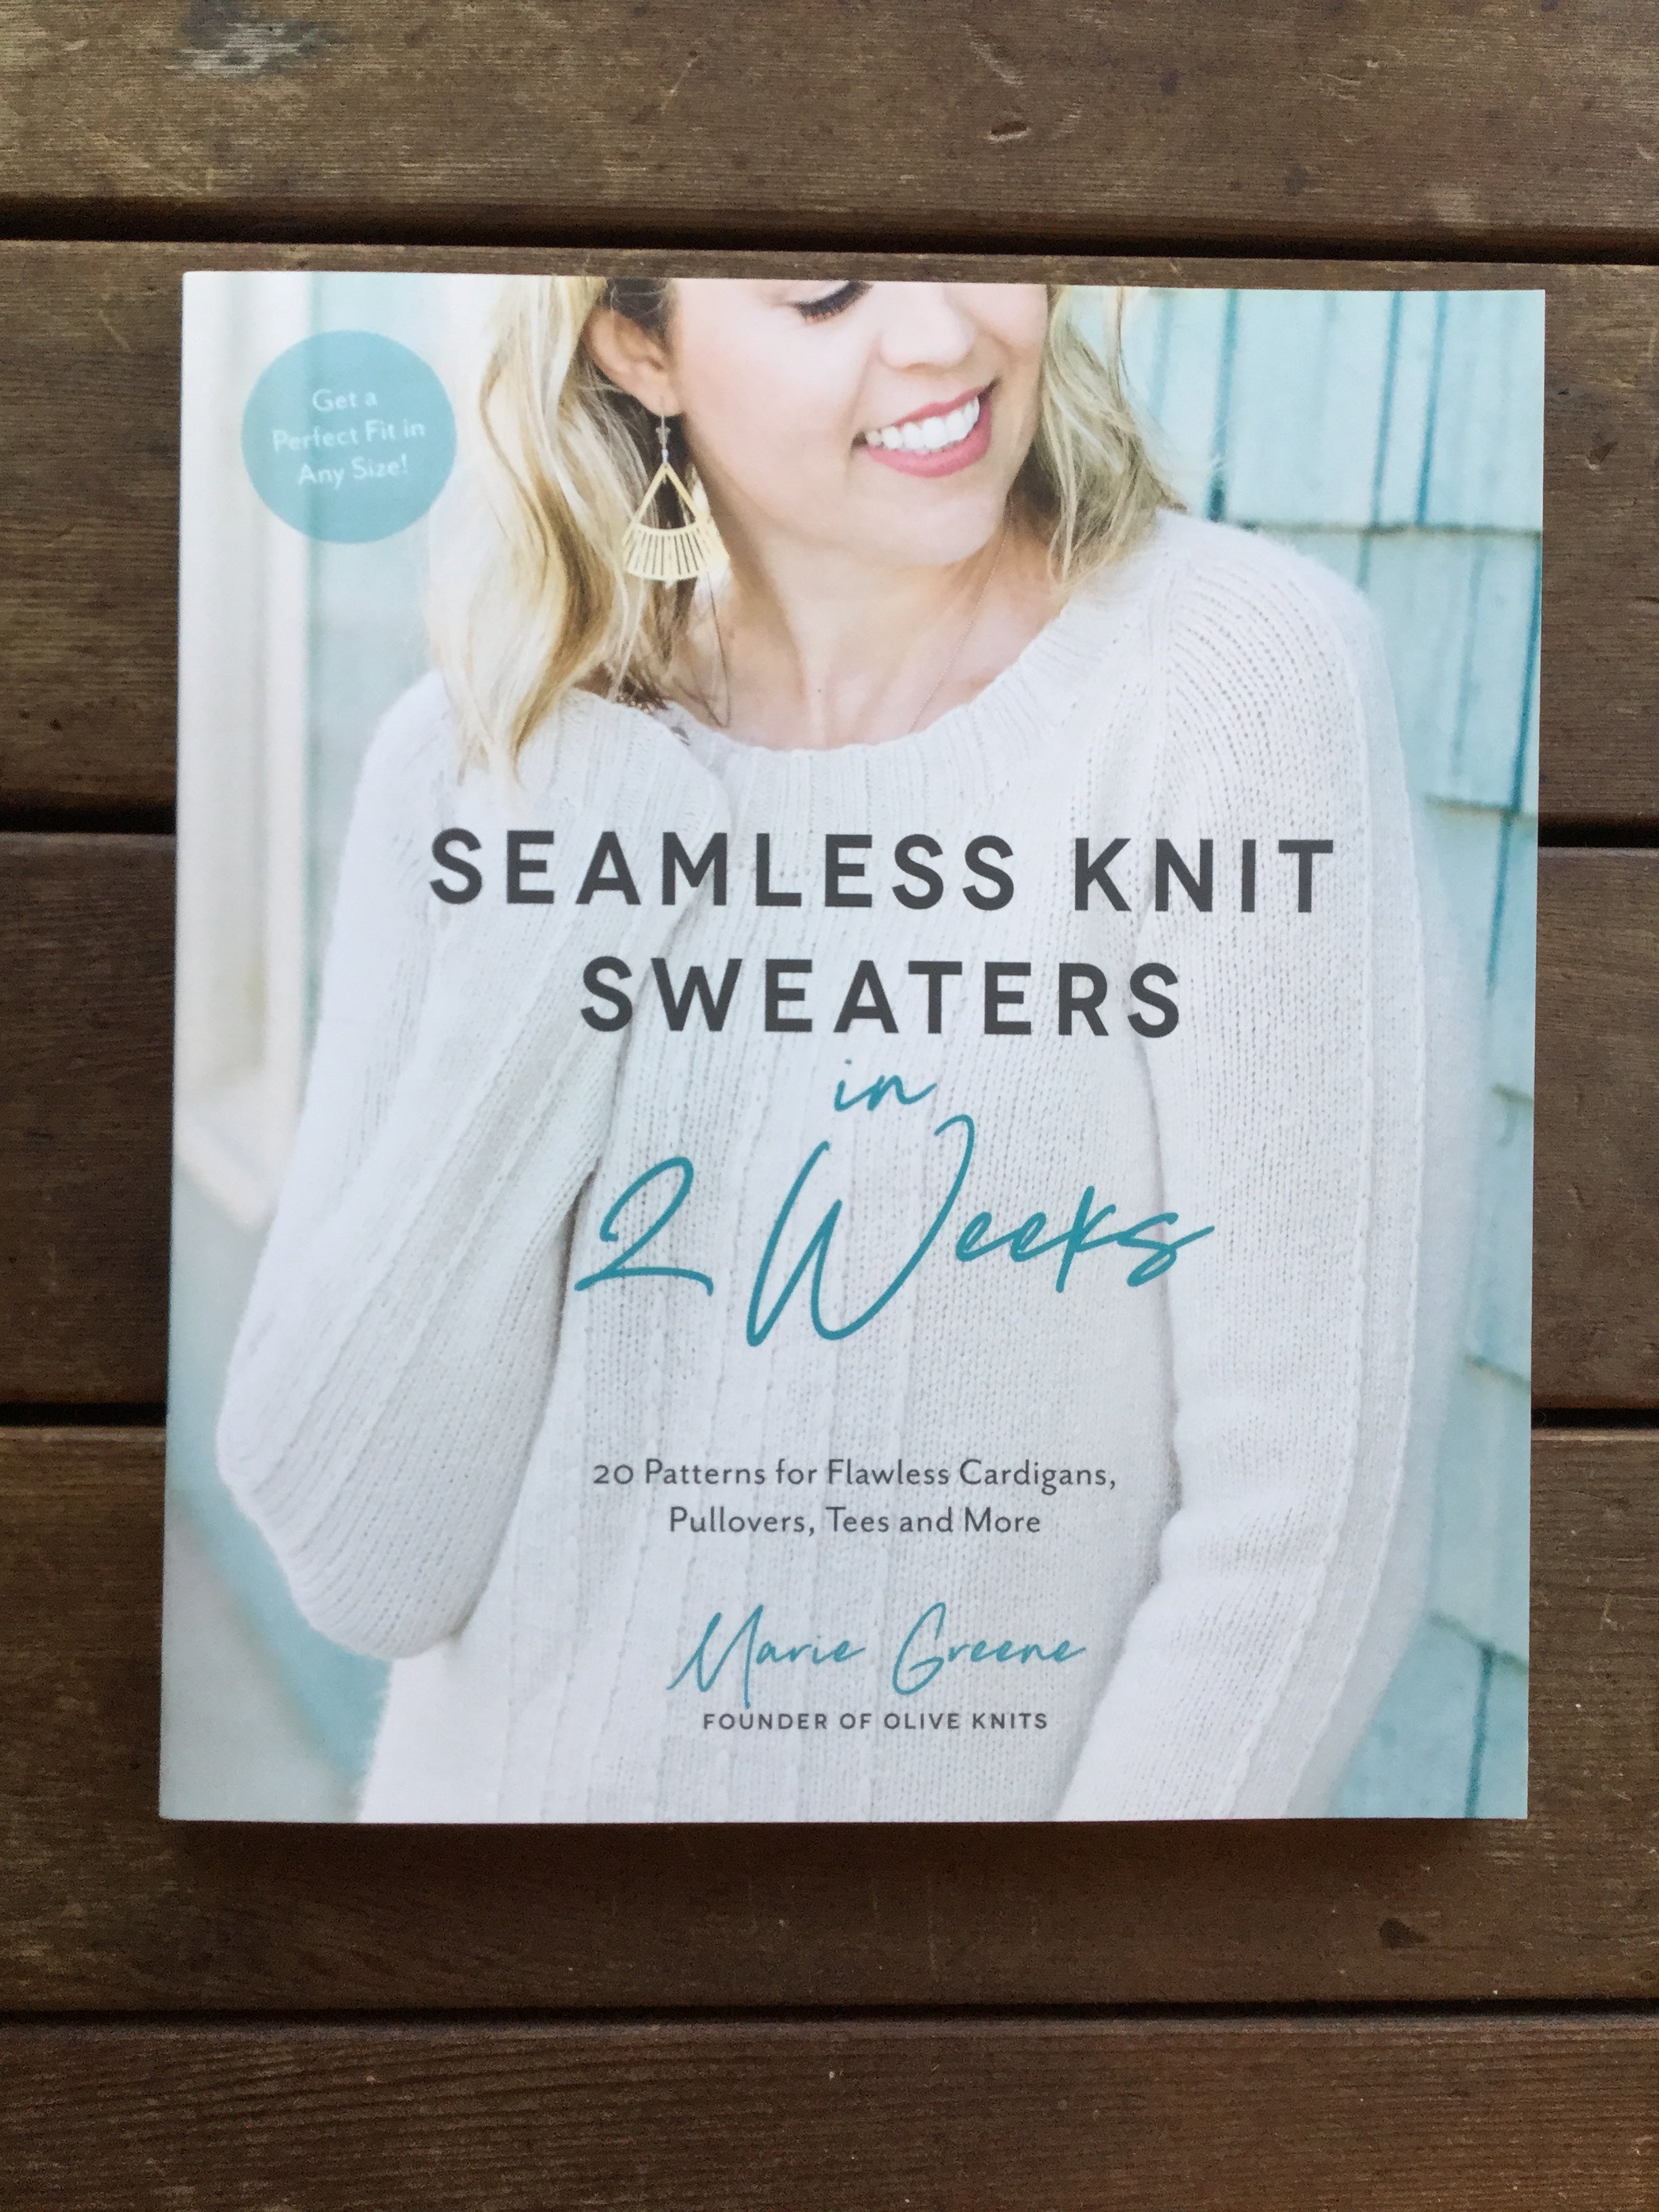 Seamless Knit Sweaters book by Marie Greene